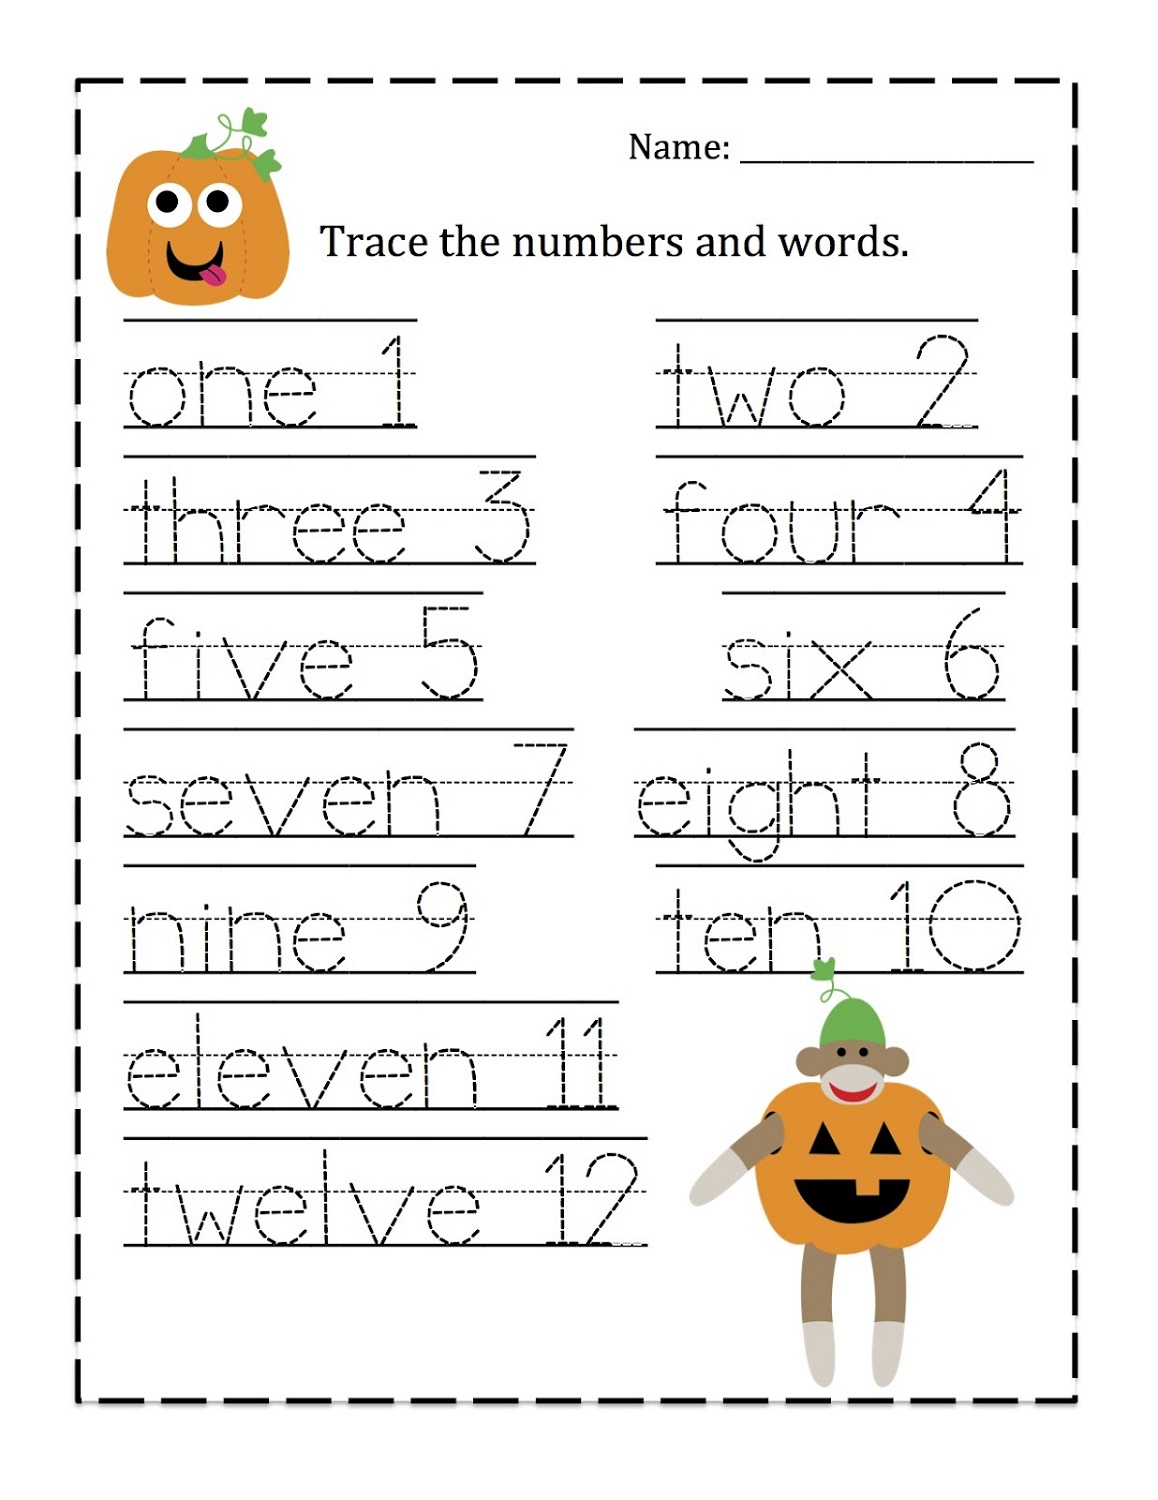 printable-number-words-worksheets-activity-shelter-14-best-images-of-practice-writing-words